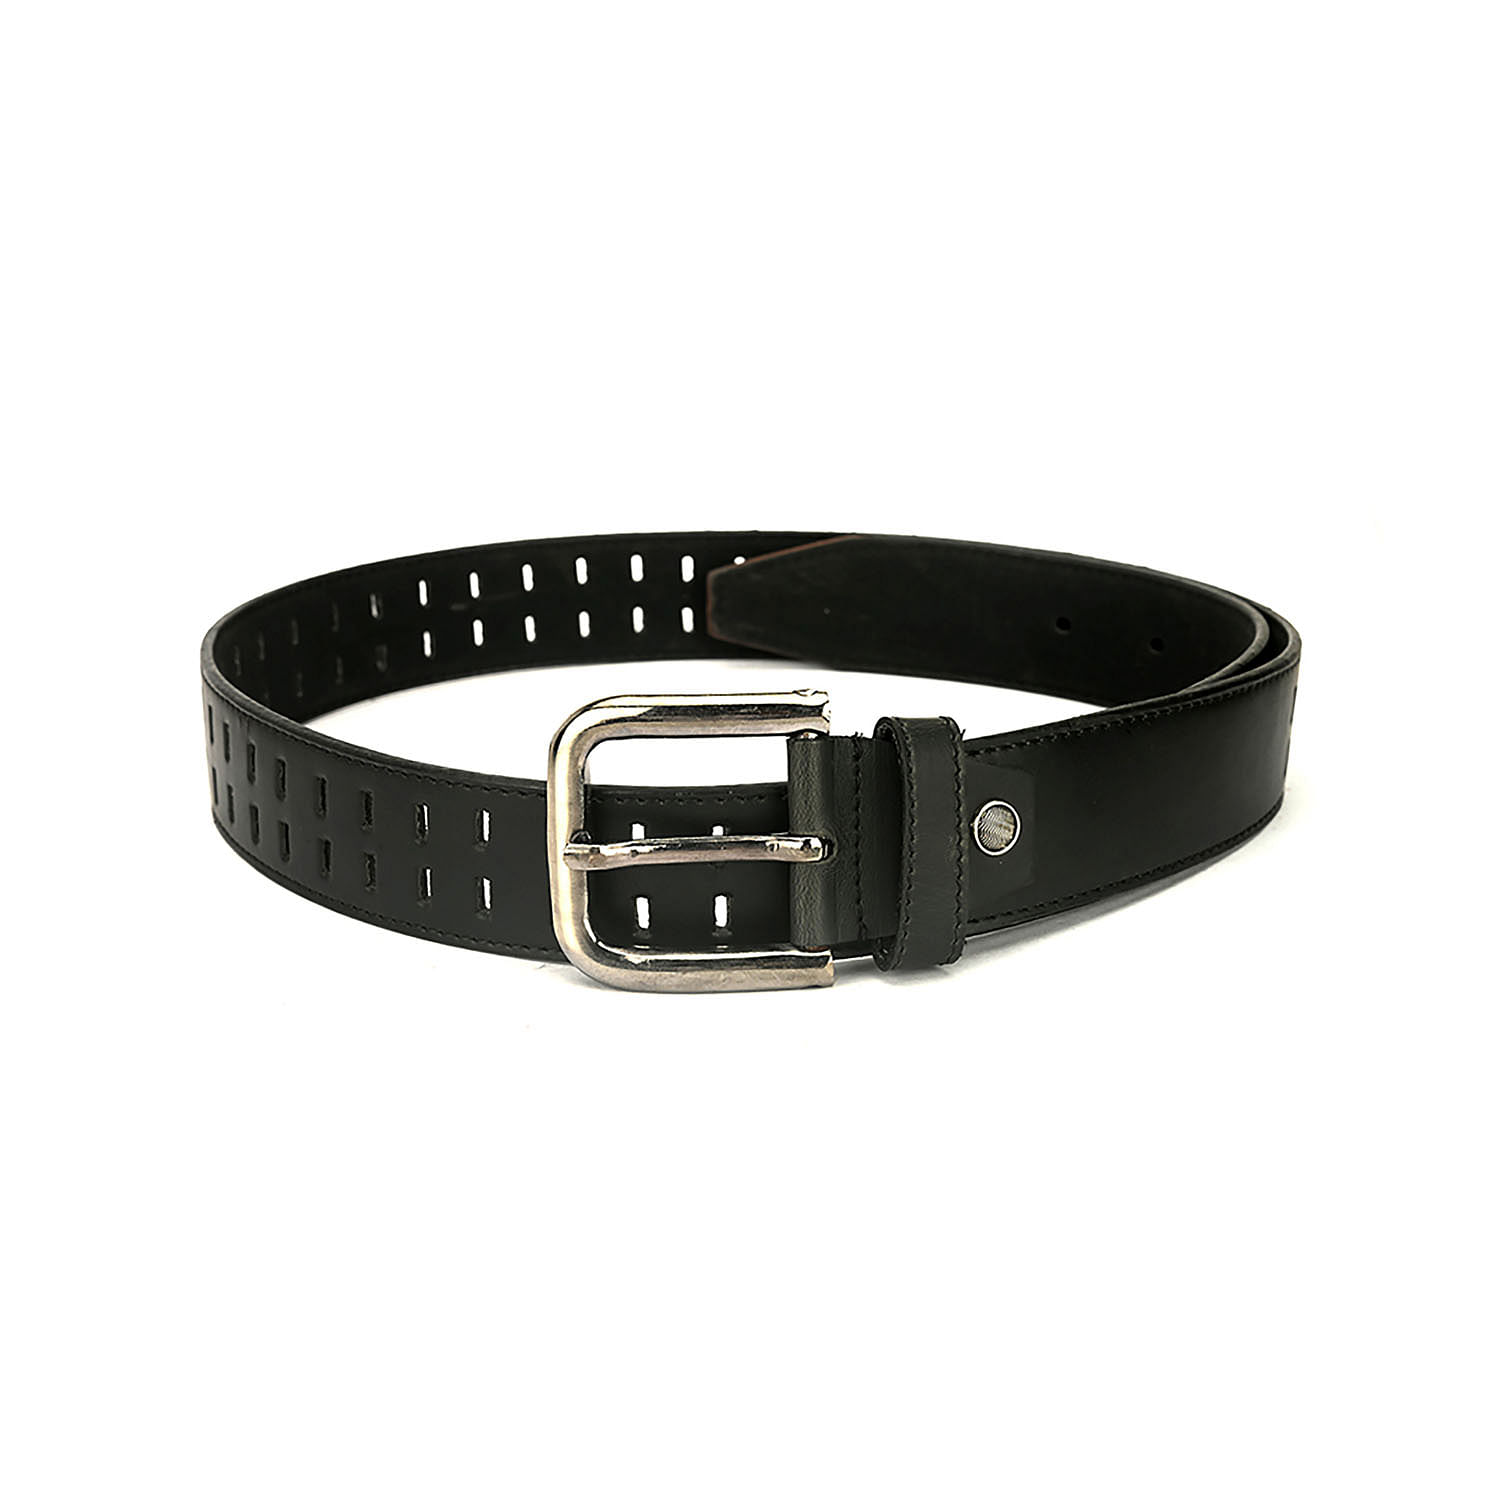 Men's Casual Textured Perforated Belt Black - LZ-CB-104